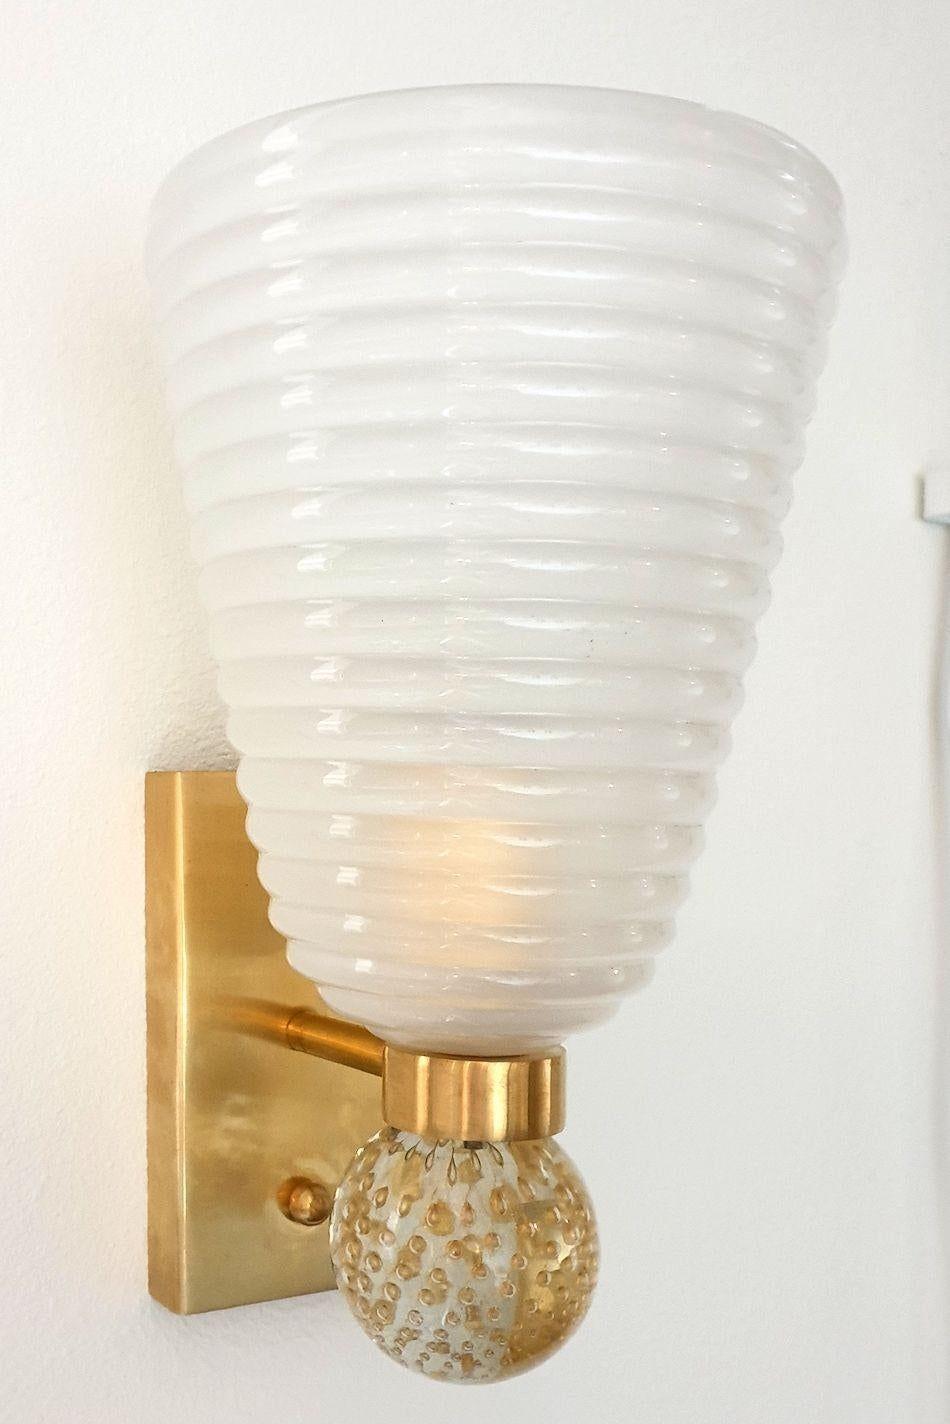 Pair of neoclassical style Murano glass wall sconces, attributed to Cenedese, Italy, circa 1980s.
The Mid-Century Modern sconces are made of a frosted Murano glass shade, nesting the light bulb.
The mounts are in solid brass; and they have a clear